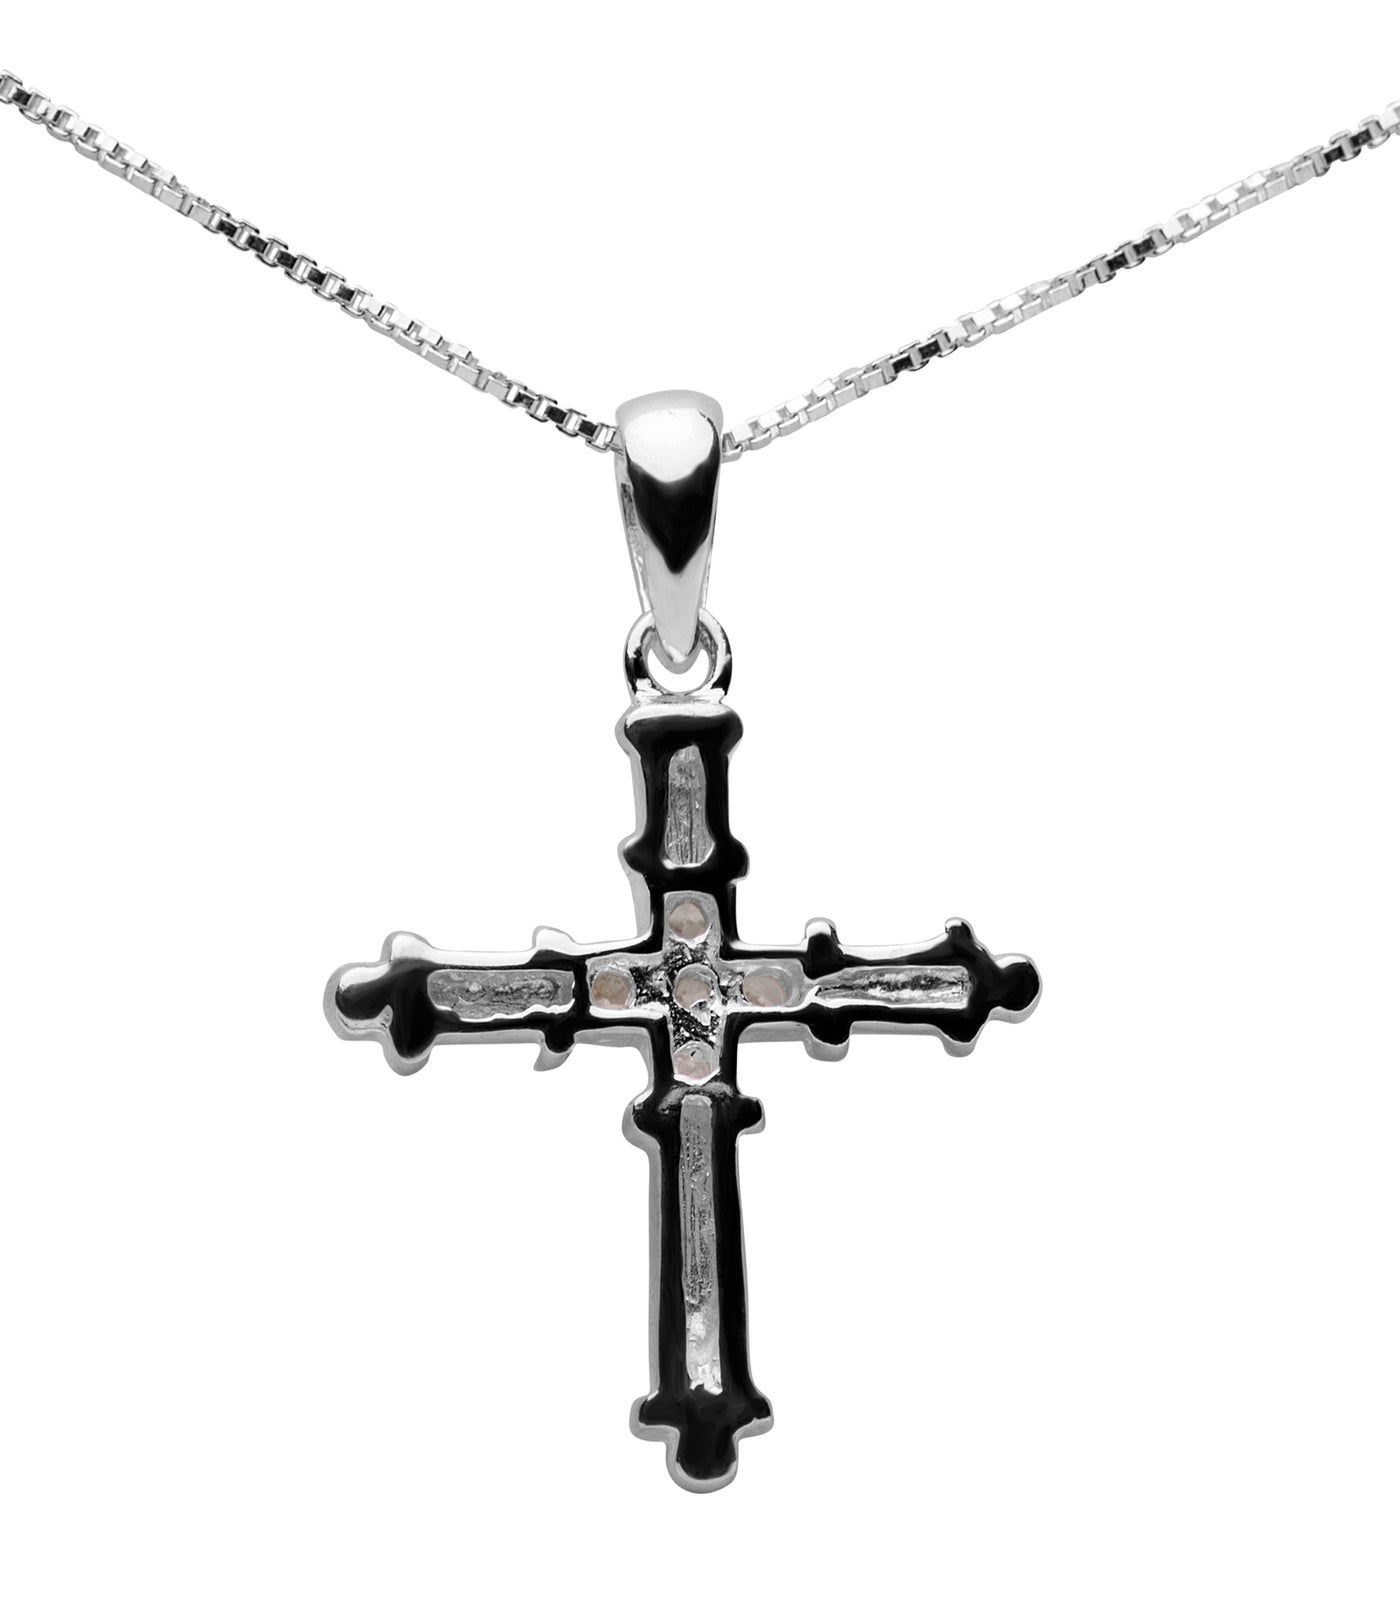 Silver & Crystal Cross Pendant Necklace